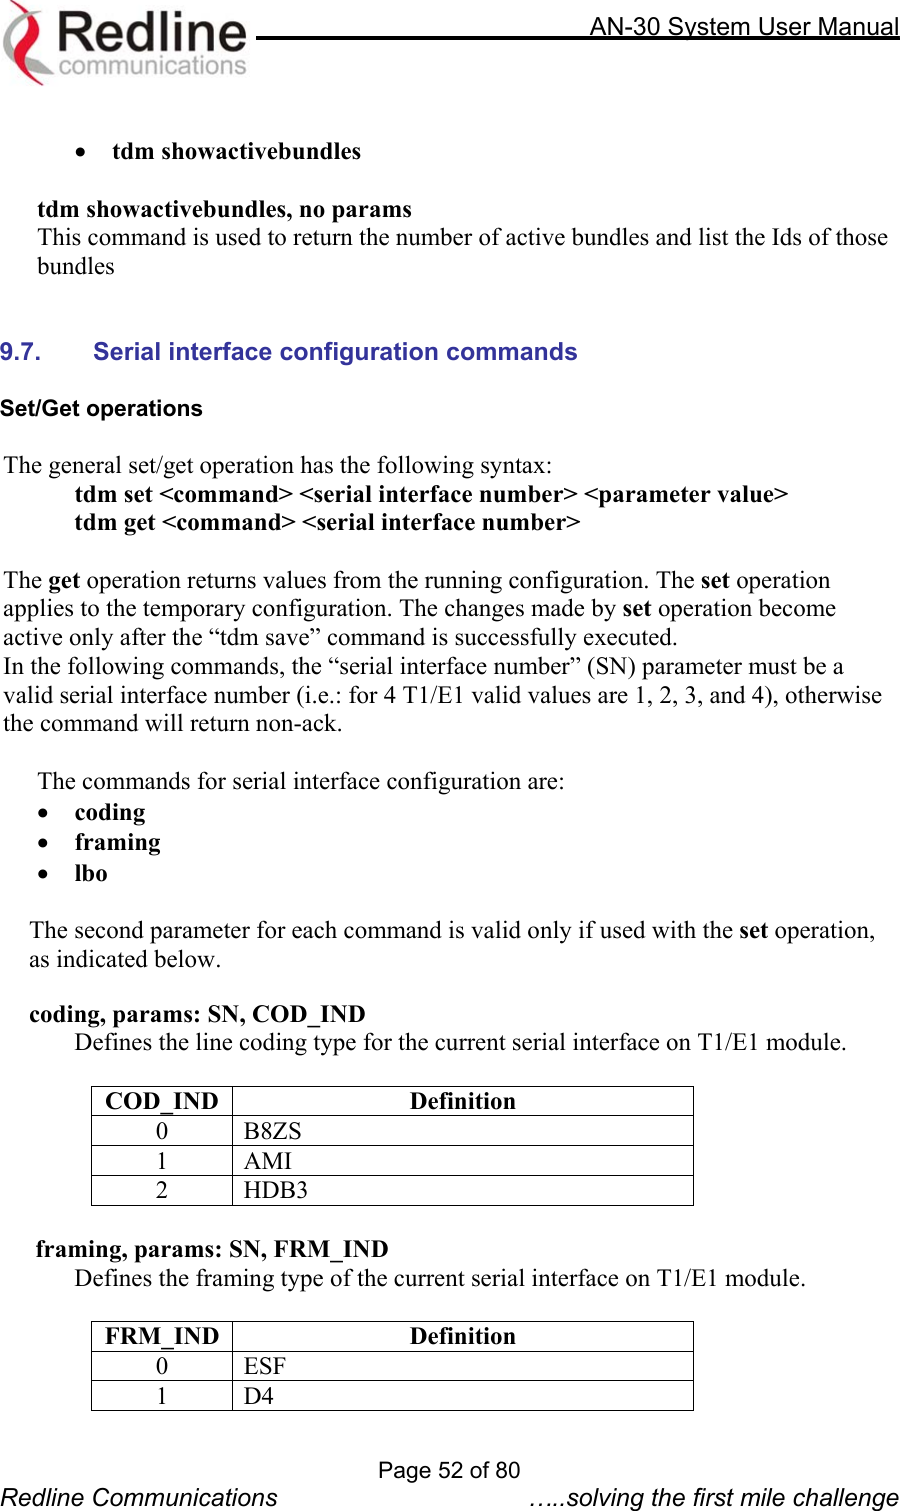     AN-30 System User Manual   •  tdm showactivebundles  tdm showactivebundles, no params This command is used to return the number of active bundles and list the Ids of those bundles   9.7. Serial interface configuration commands  Set/Get operations  The general set/get operation has the following syntax:  tdm set &lt;command&gt; &lt;serial interface number&gt; &lt;parameter value&gt;   tdm get &lt;command&gt; &lt;serial interface number&gt;  The get operation returns values from the running configuration. The set operation applies to the temporary configuration. The changes made by set operation become active only after the “tdm save” command is successfully executed. In the following commands, the “serial interface number” (SN) parameter must be a valid serial interface number (i.e.: for 4 T1/E1 valid values are 1, 2, 3, and 4), otherwise the command will return non-ack.  The commands for serial interface configuration are:  •  coding •  framing •  lbo  The second parameter for each command is valid only if used with the set operation, as indicated below.  coding, params: SN, COD_IND   Defines the line coding type for the current serial interface on T1/E1 module.  COD_IND Definition 0 B8ZS 1 AMI 2 HDB3   framing, params: SN, FRM_IND   Defines the framing type of the current serial interface on T1/E1 module.  FRM_IND Definition 0 ESF 1 D4 Page 52 of 80 Redline Communications  …..solving the first mile challenge 